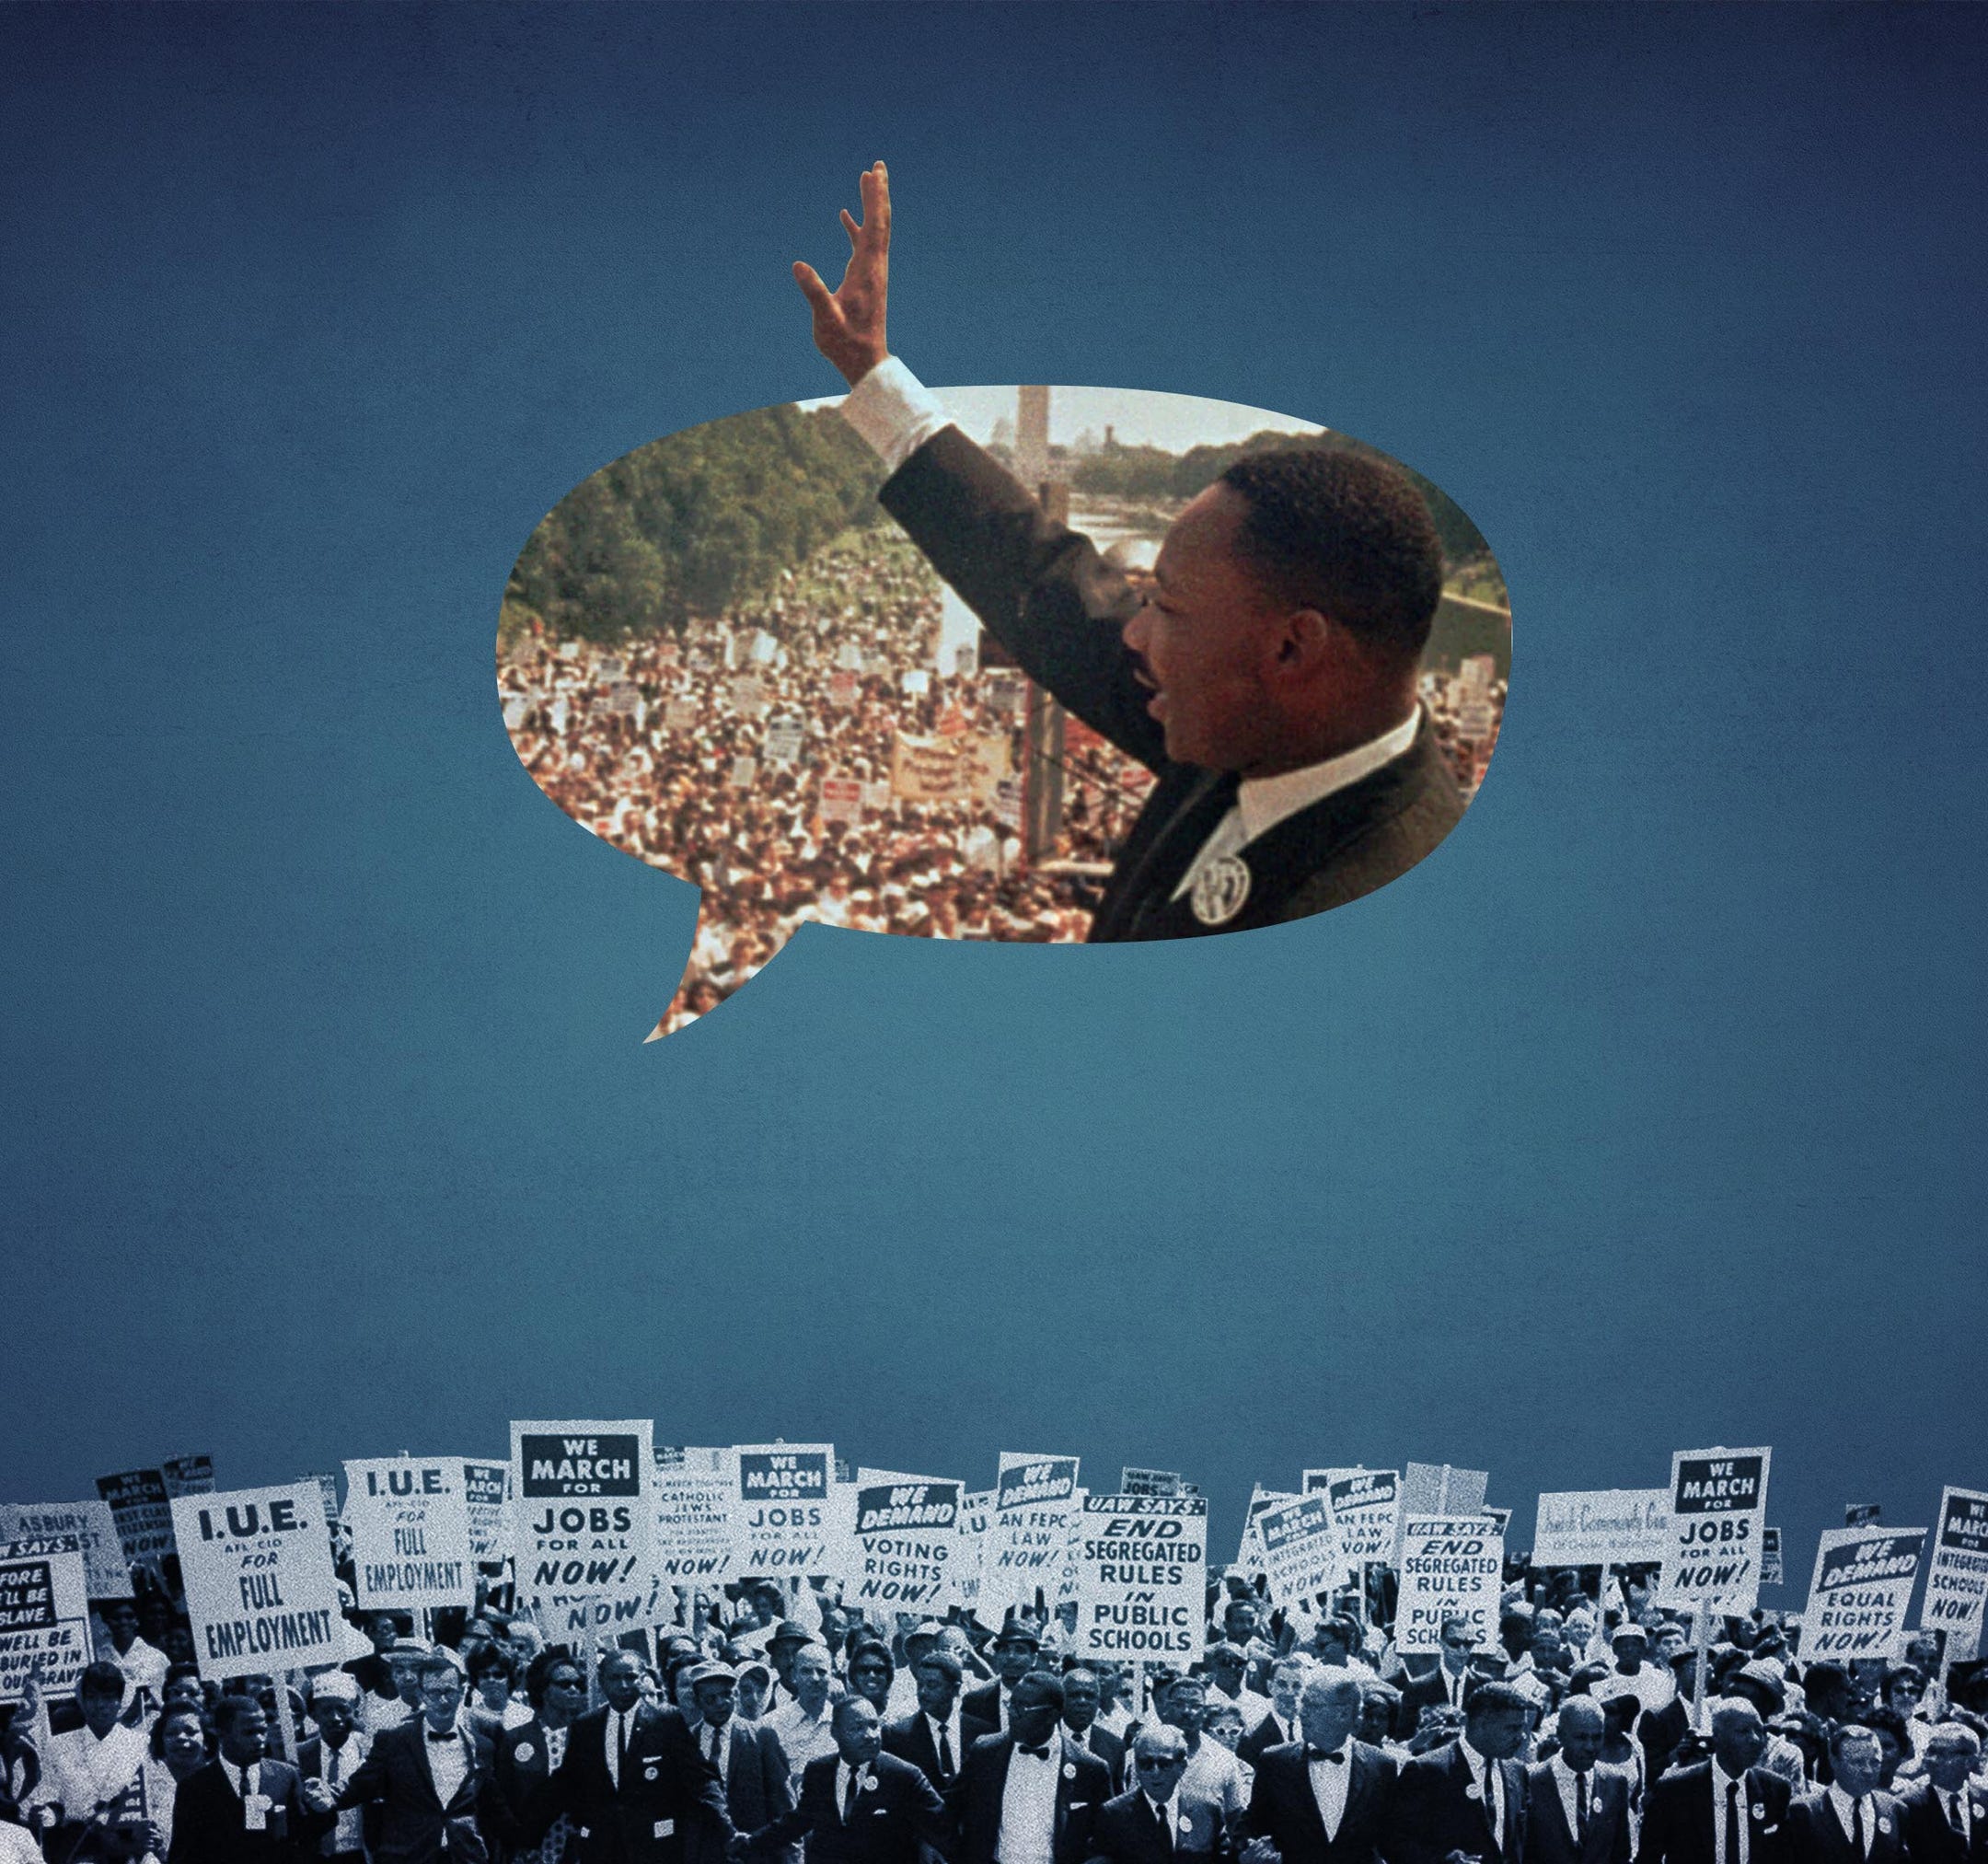 I have a dream - Martin Luther King